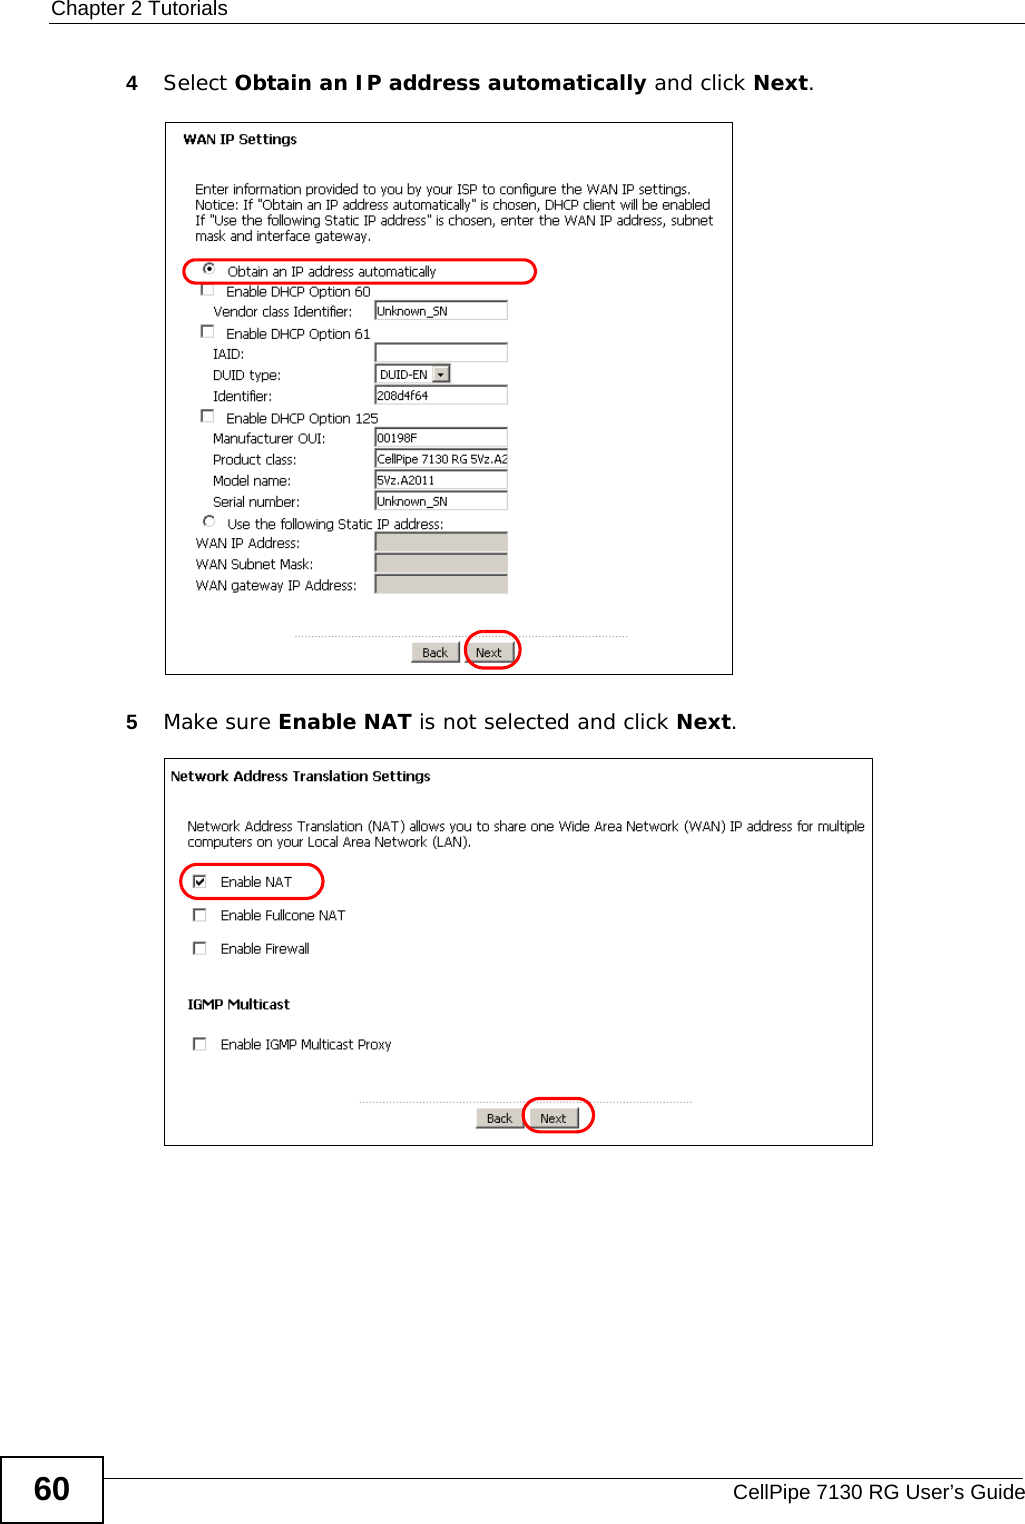 Chapter 2 TutorialsCellPipe 7130 RG User’s Guide604Select Obtain an IP address automatically and click Next.5Make sure Enable NAT is not selected and click Next.